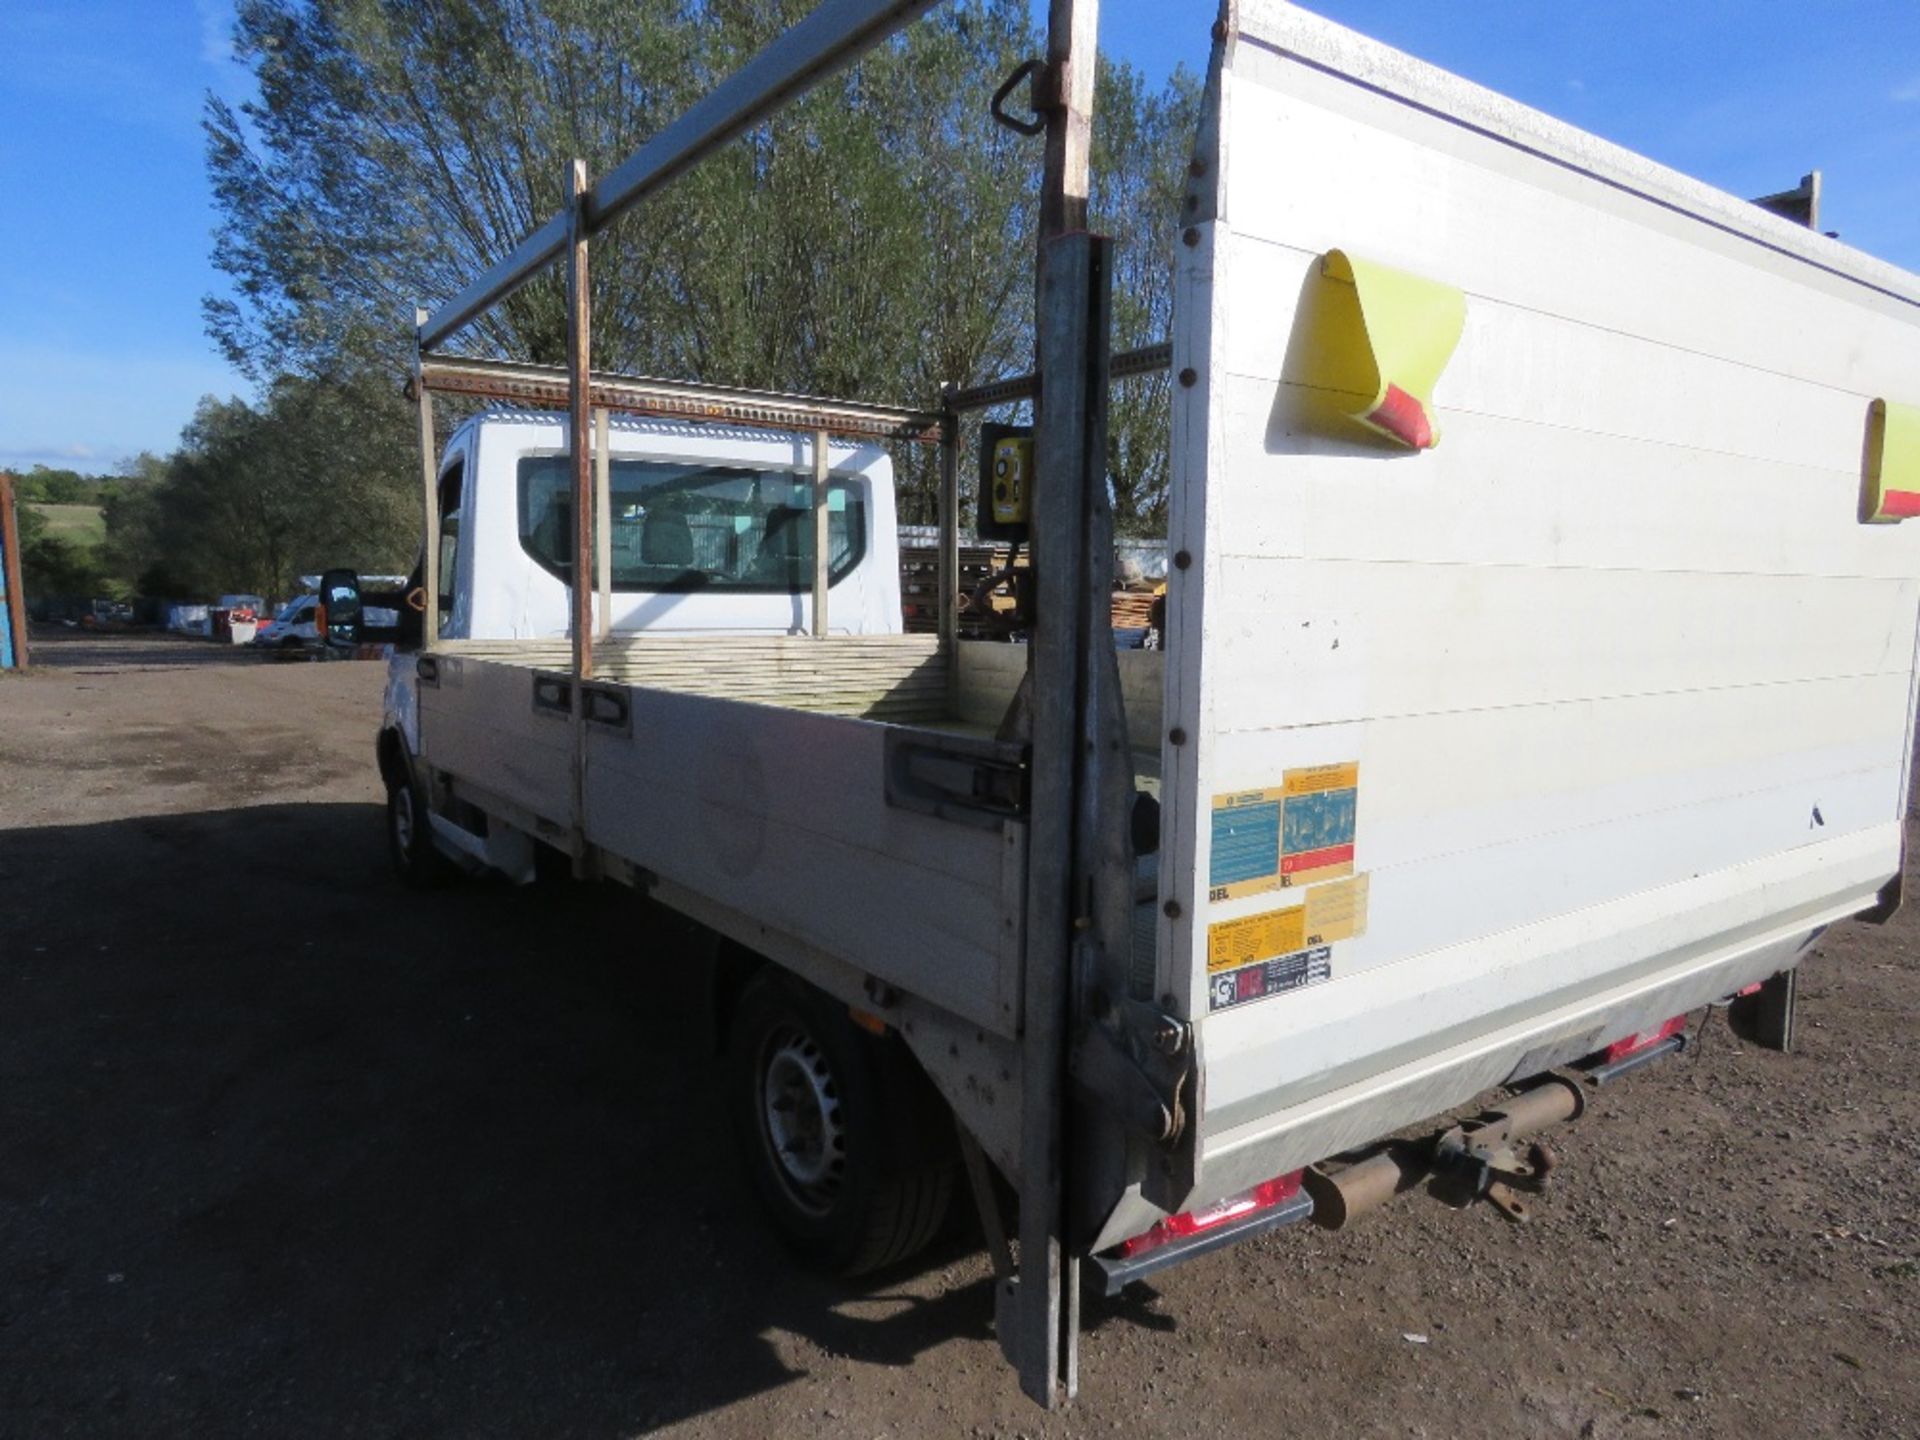 FORD TRANSIT 350 FLAT BED PICKUP TRUCK WITH REAR TAIL LIFT REG:GH16 MTE. WITH V5, OWNED BY VENDOR FR - Image 8 of 13